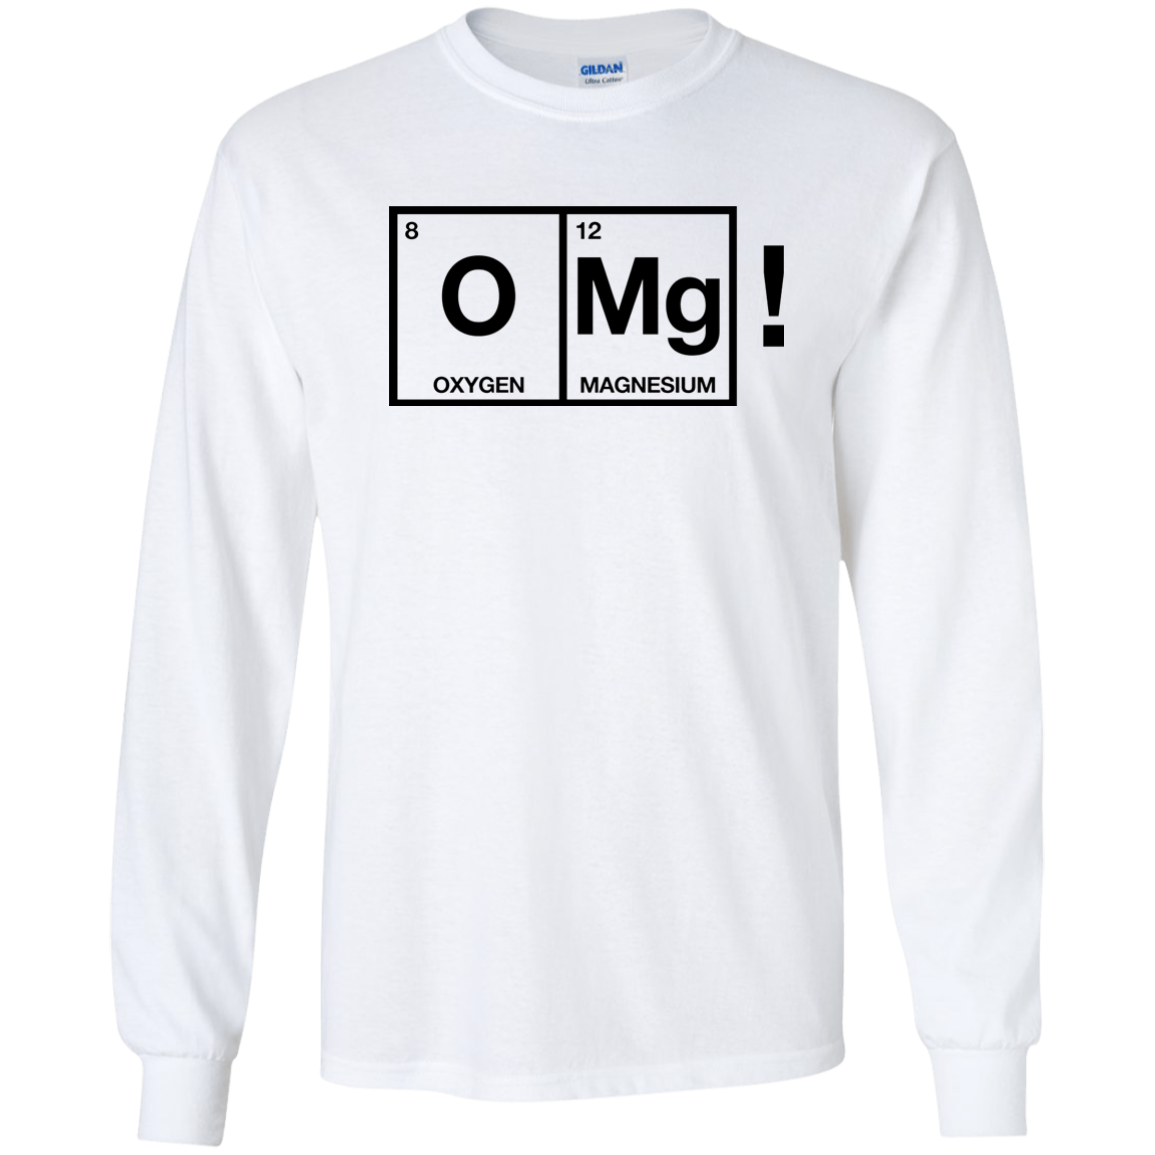 O Mg - Table Of Elements